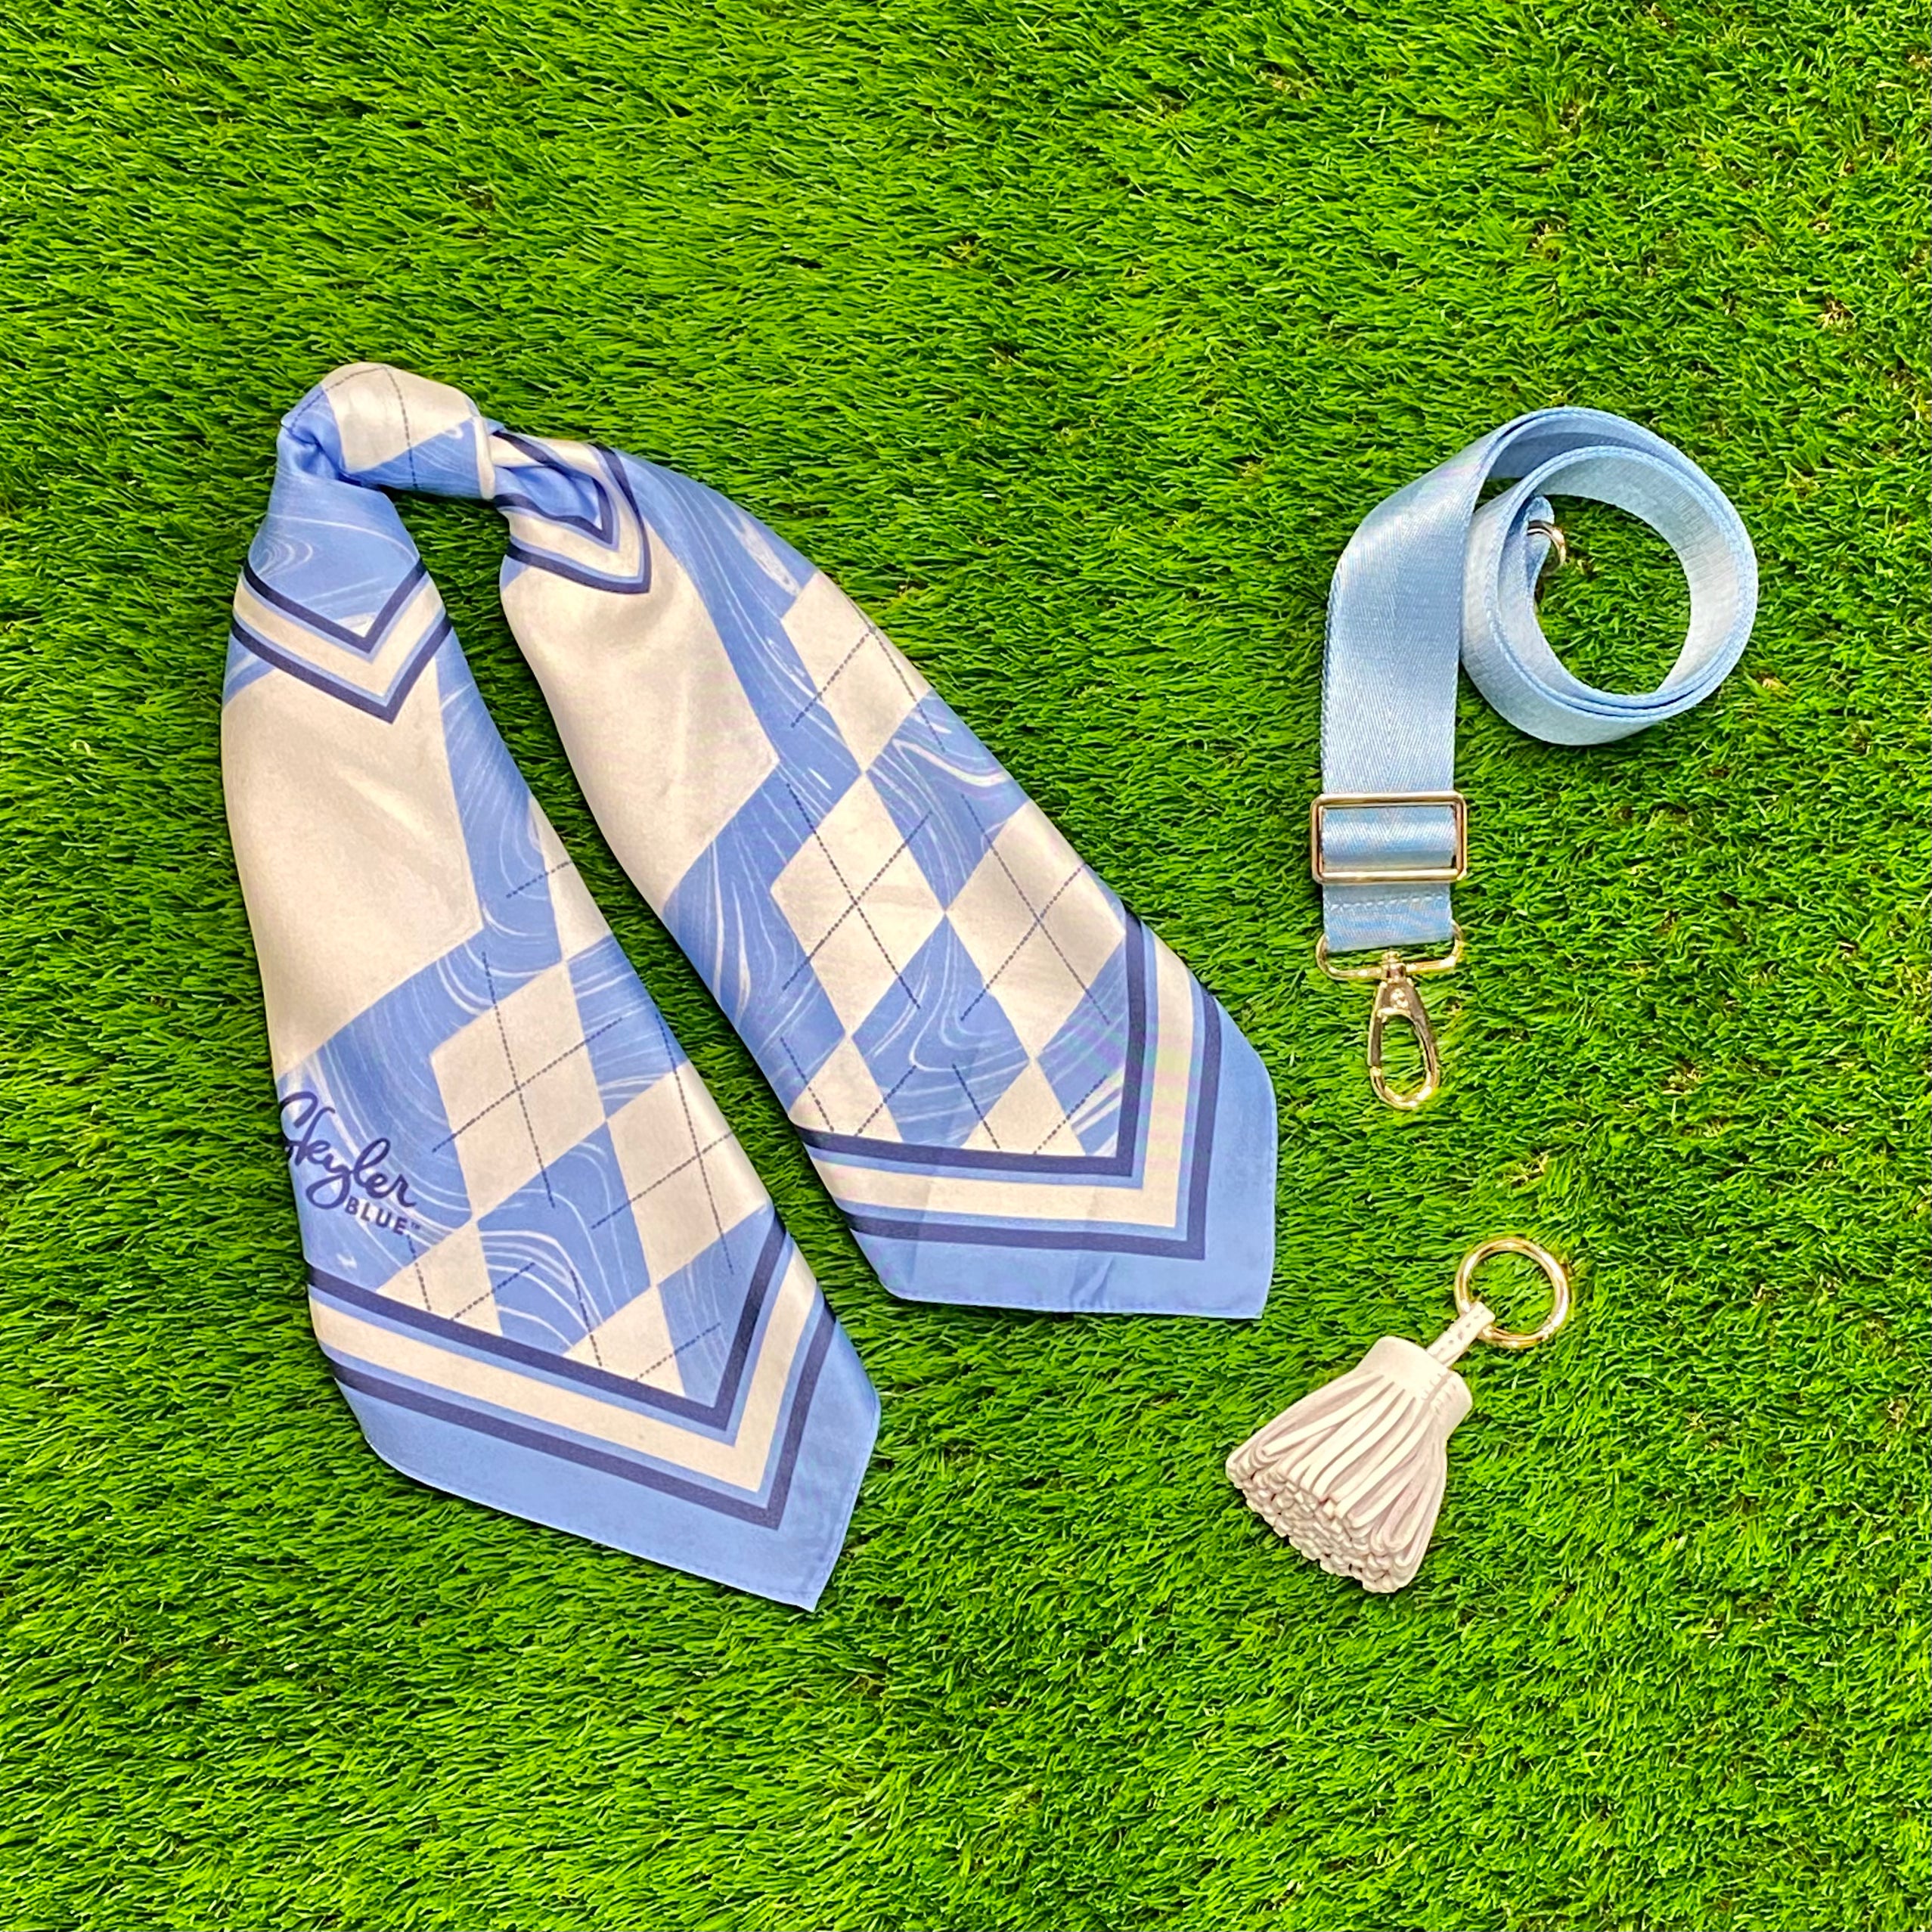 Skyler Blue’s The Chapel Hill Accessory Package including adjustable, nylon webbing shoulder or crossbody strap with herringbone weave and gold hardware, 60-centimeter 100% silk twill scarf, and 100% genuine leather tassel. 